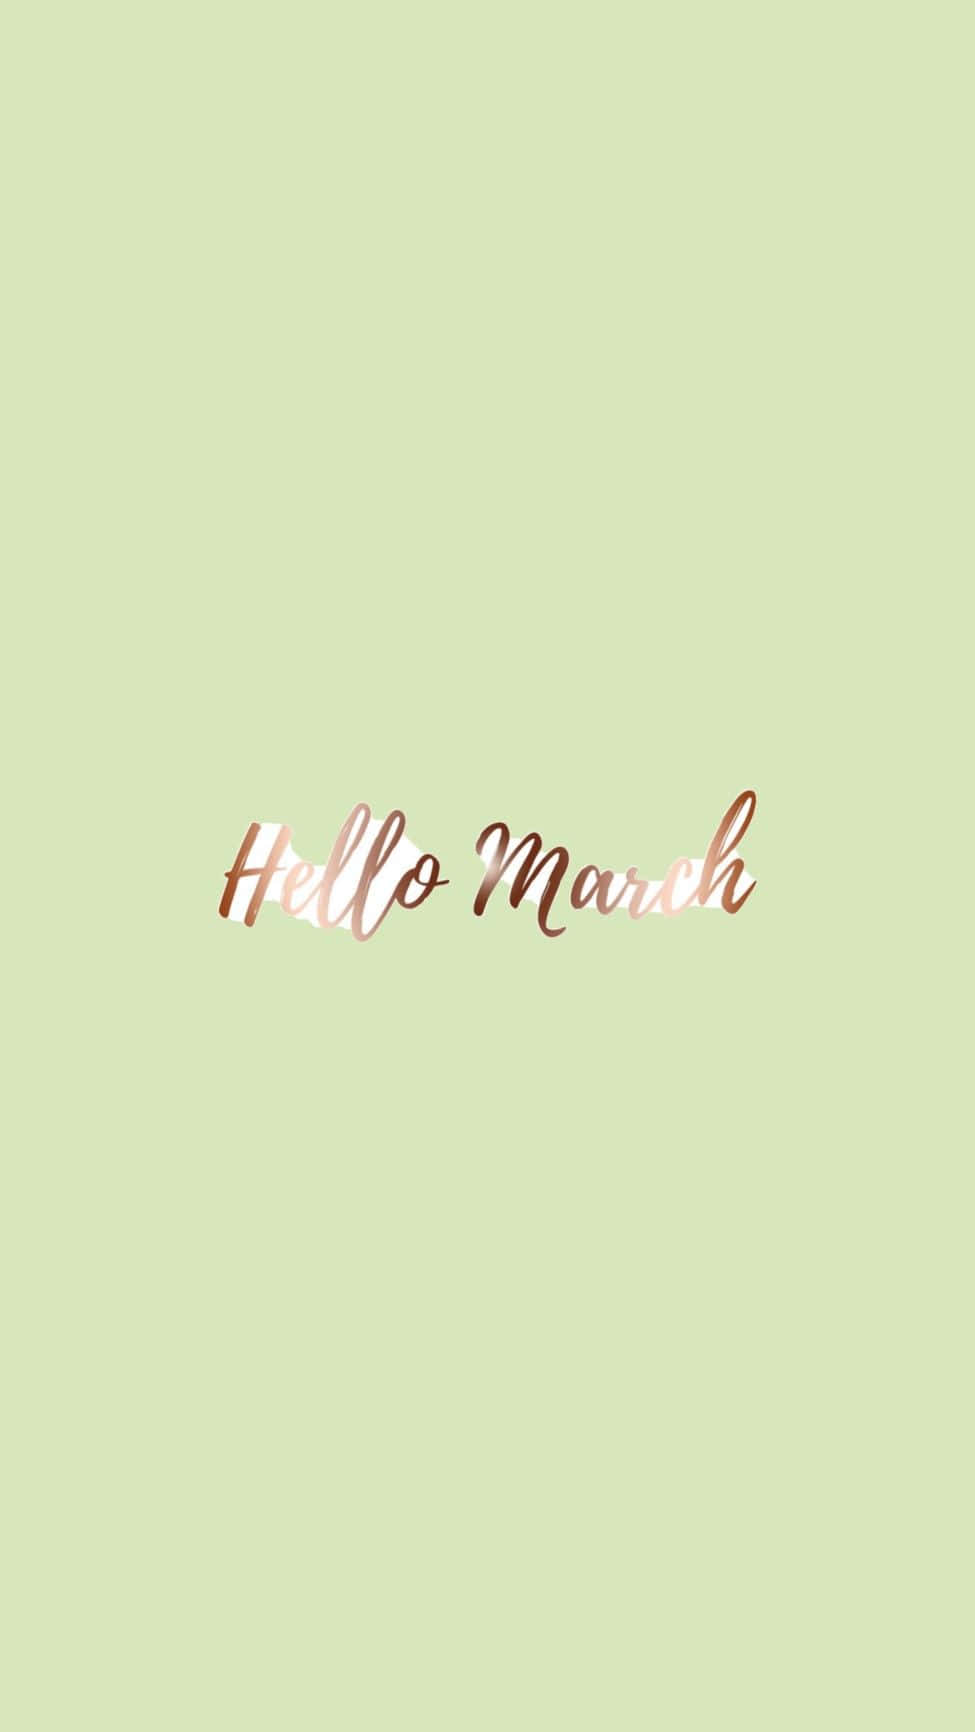 Hello March Greeting Pastel Background Wallpaper